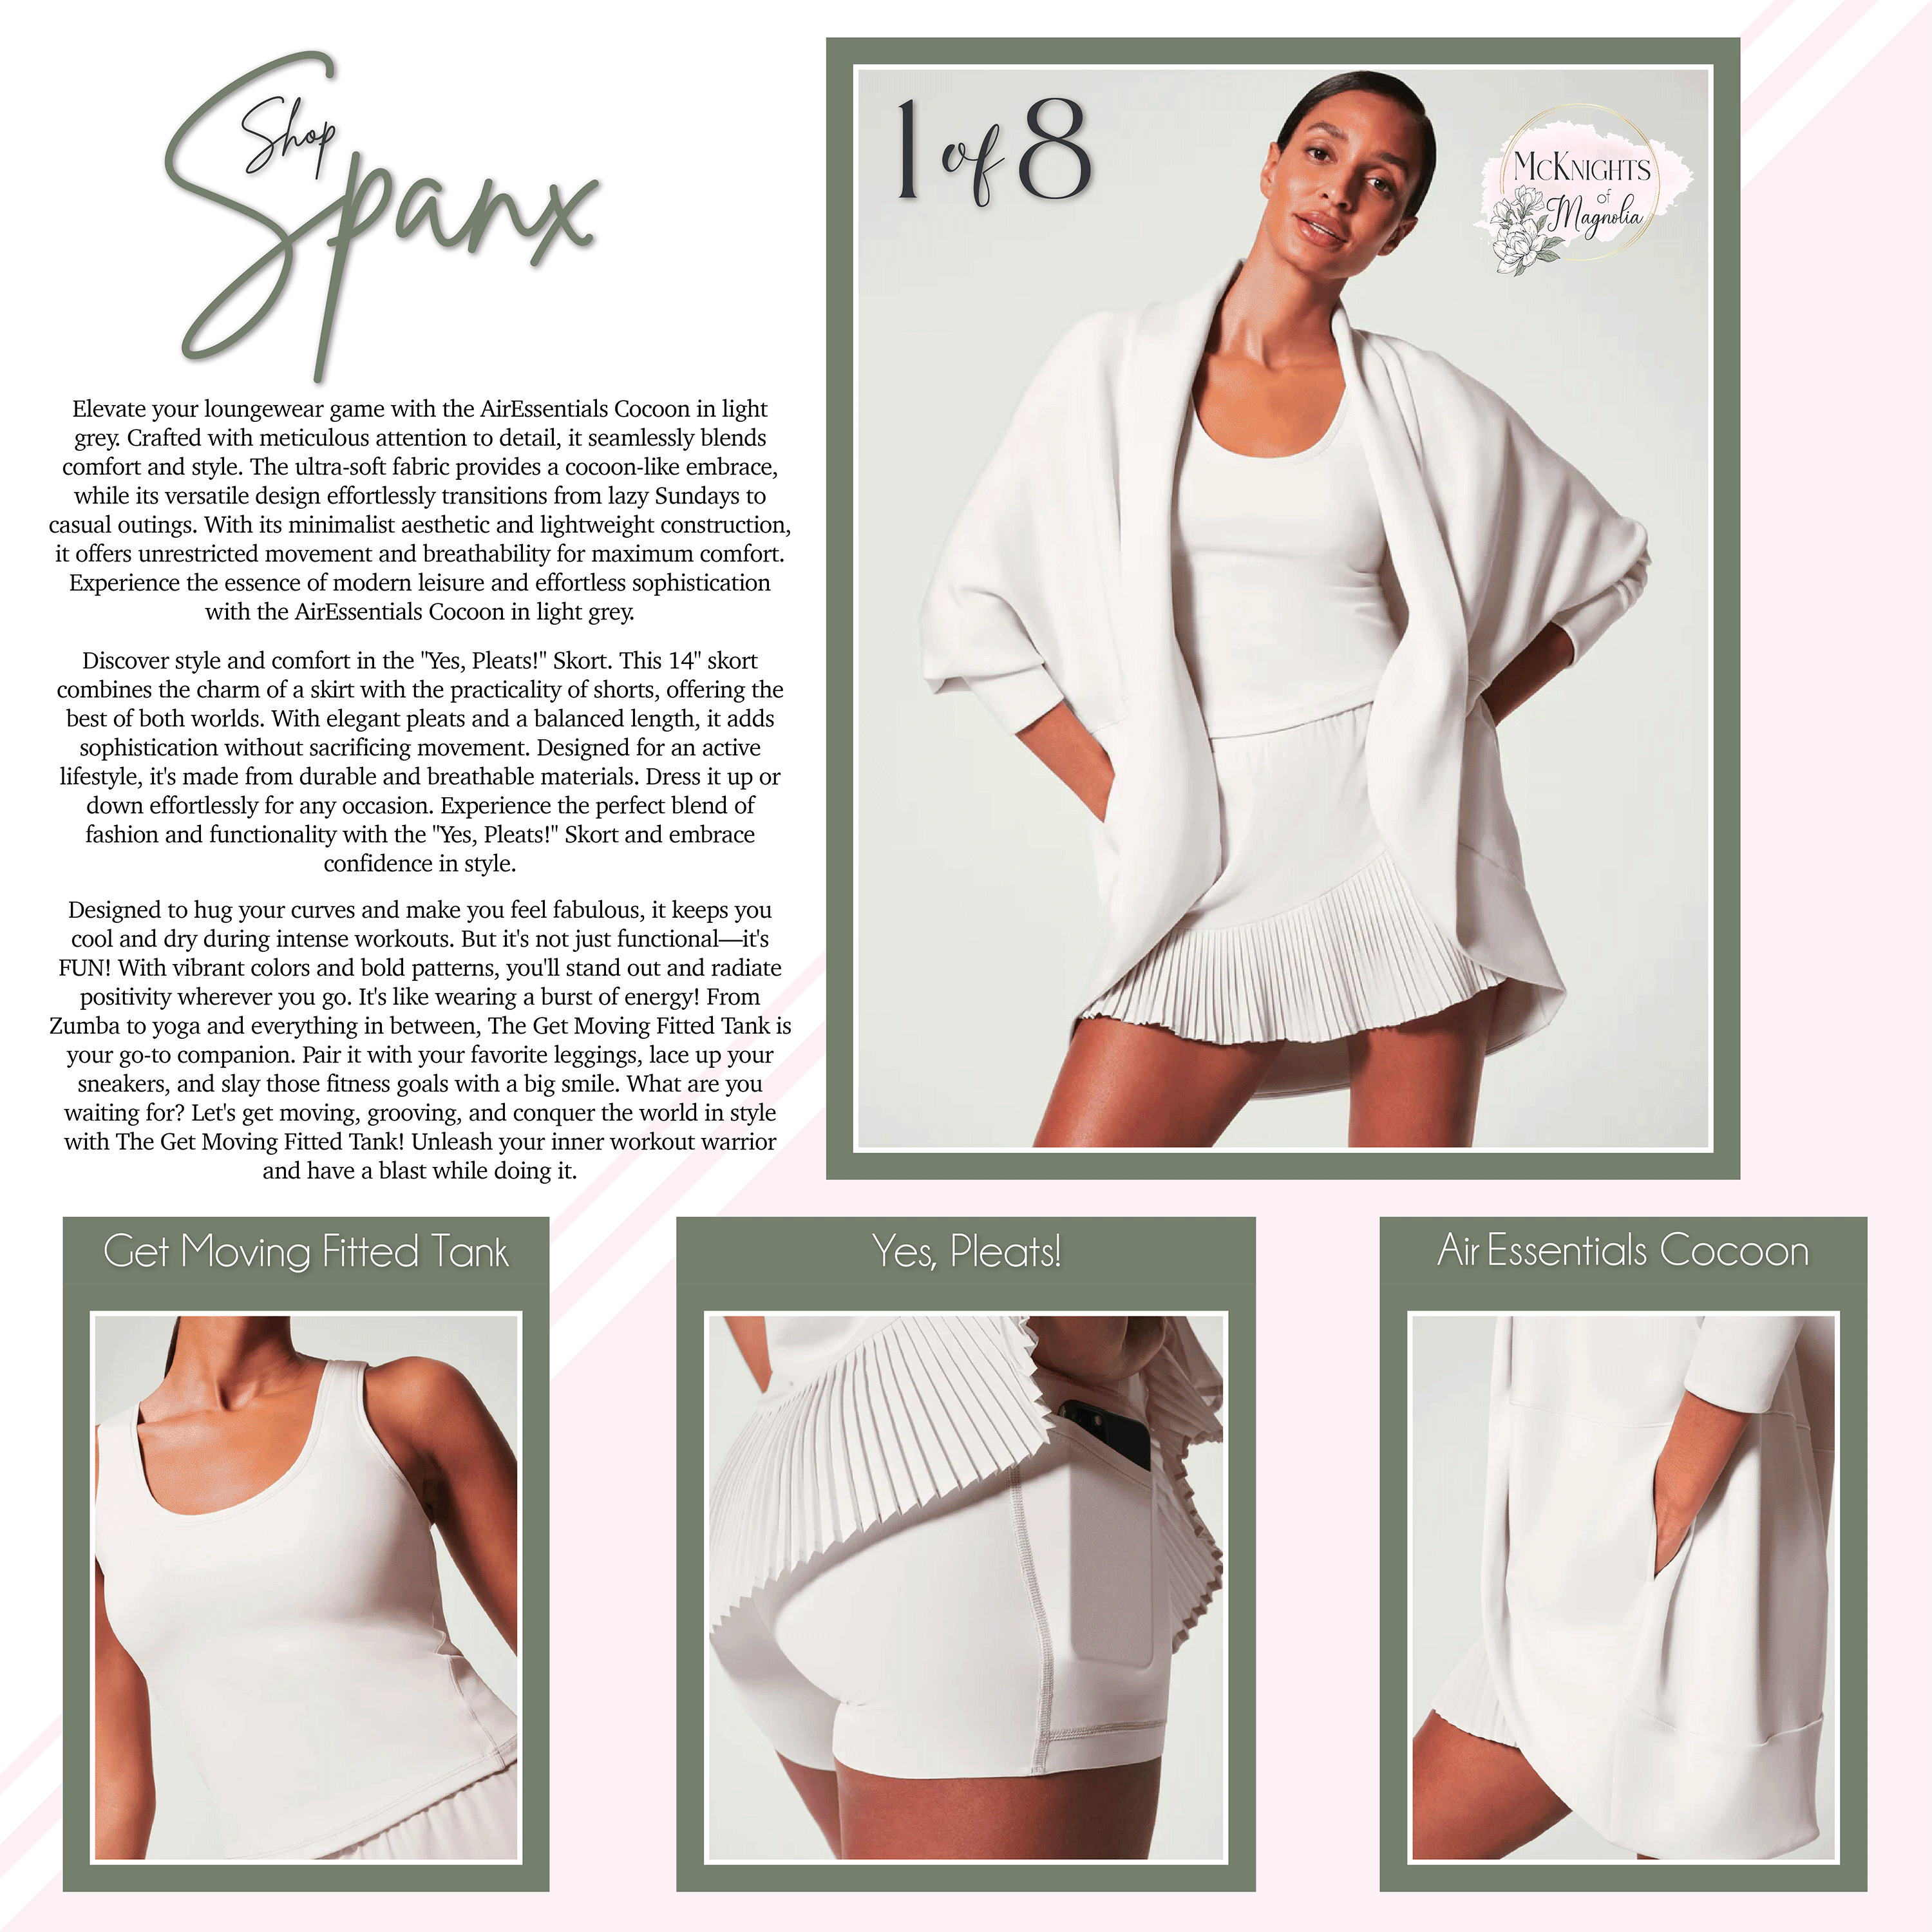 Not Your Mama’s Spanx